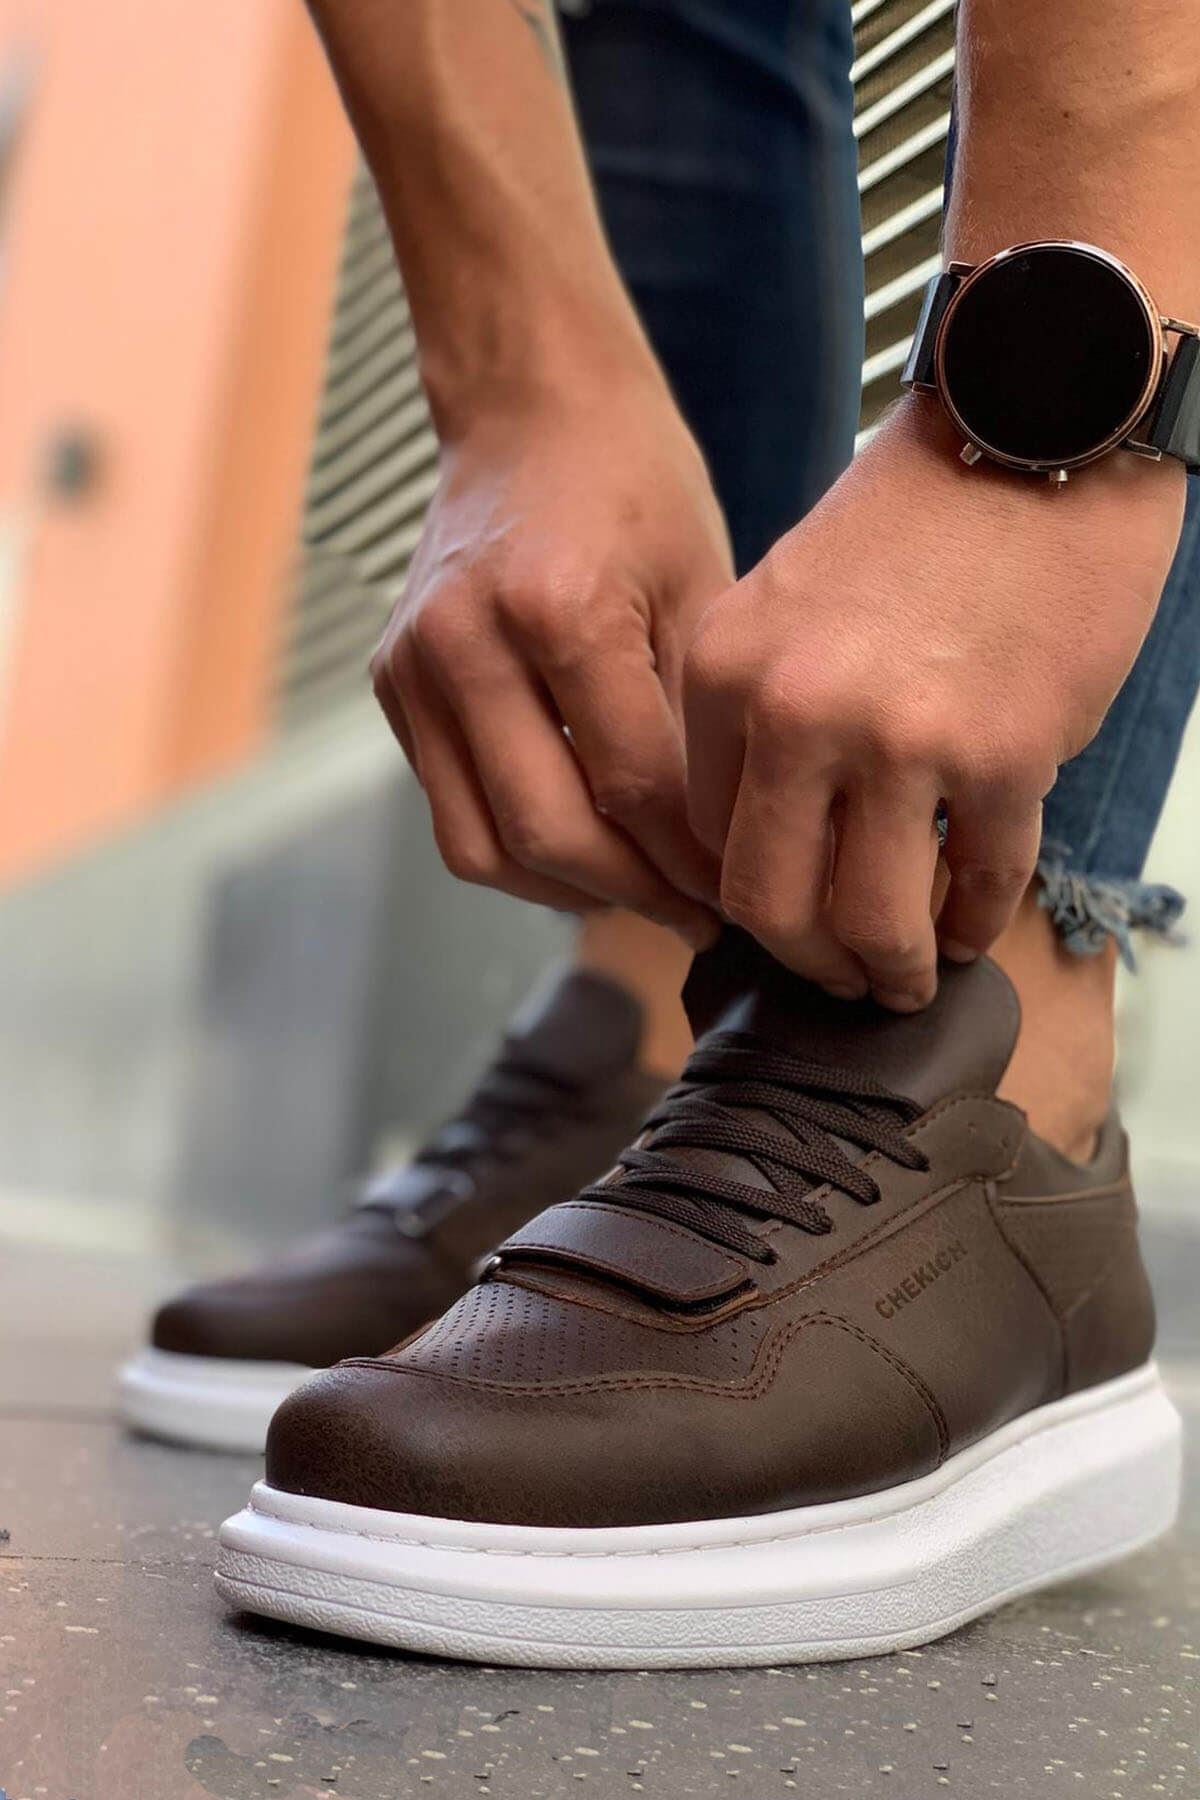 CH073 Men's Unisex Brown Lace-Up Casual Sneaker Sports Shoes - STREETMODE ™